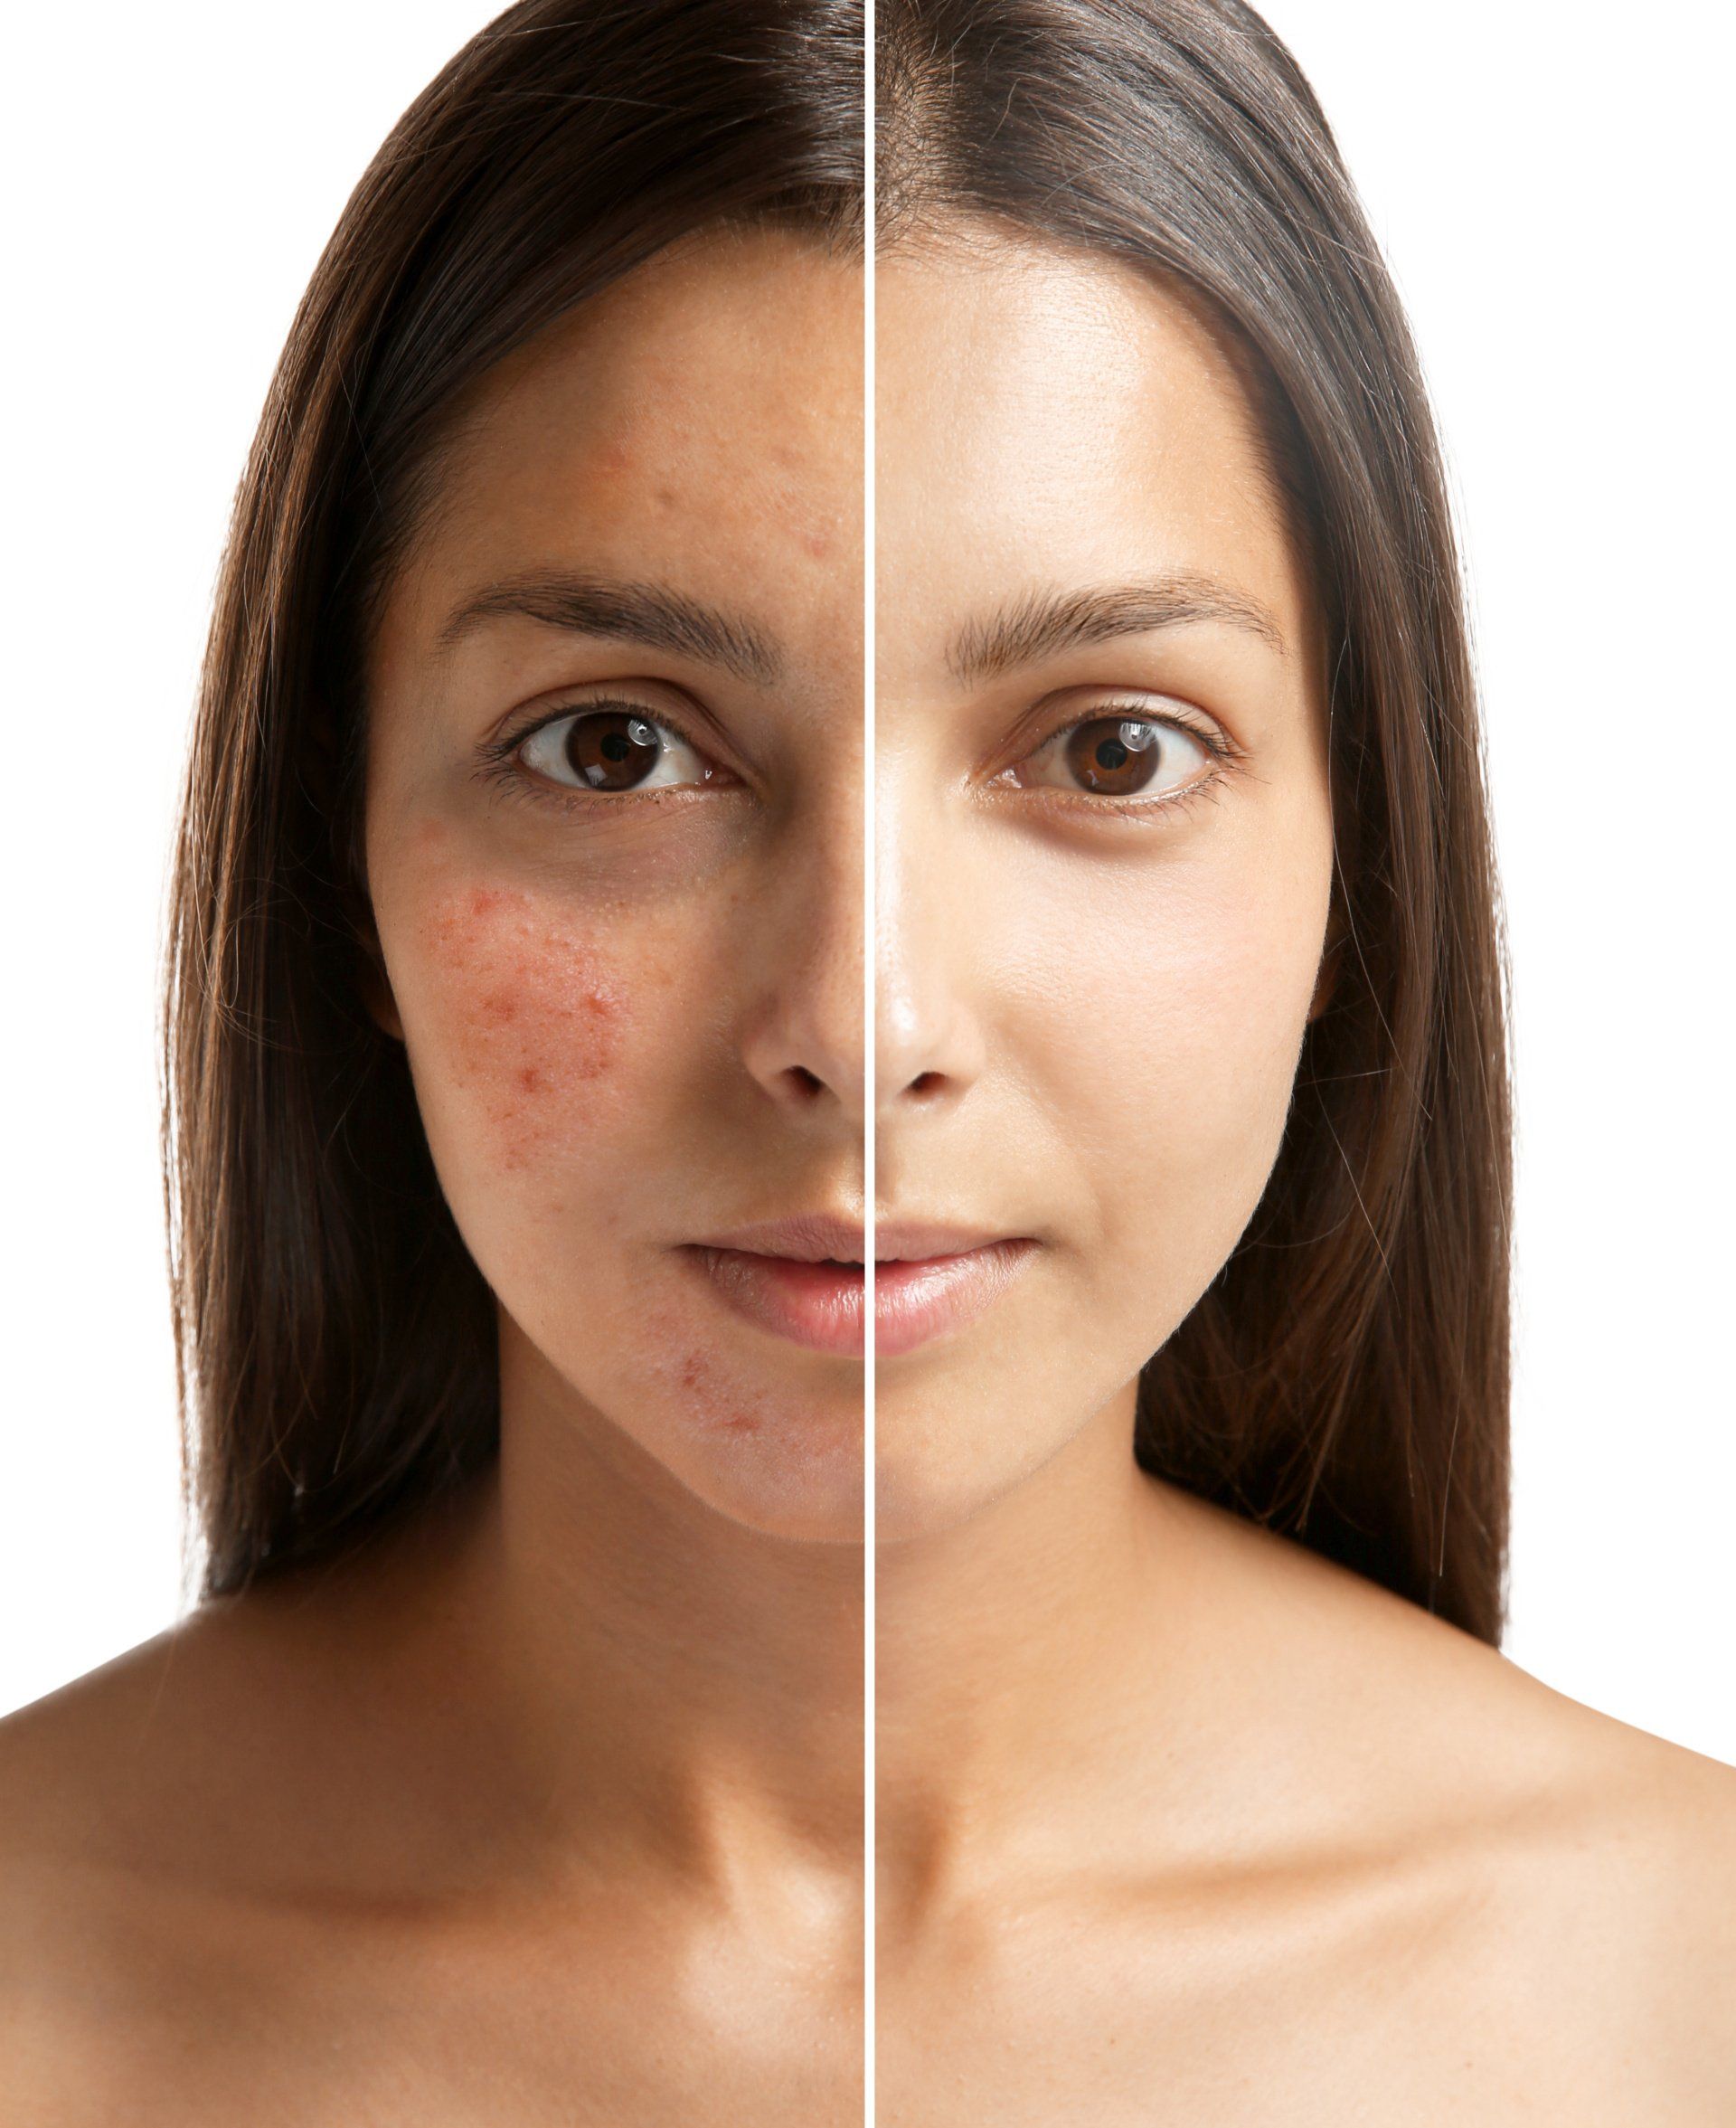 Acne Treatment & Extractions.